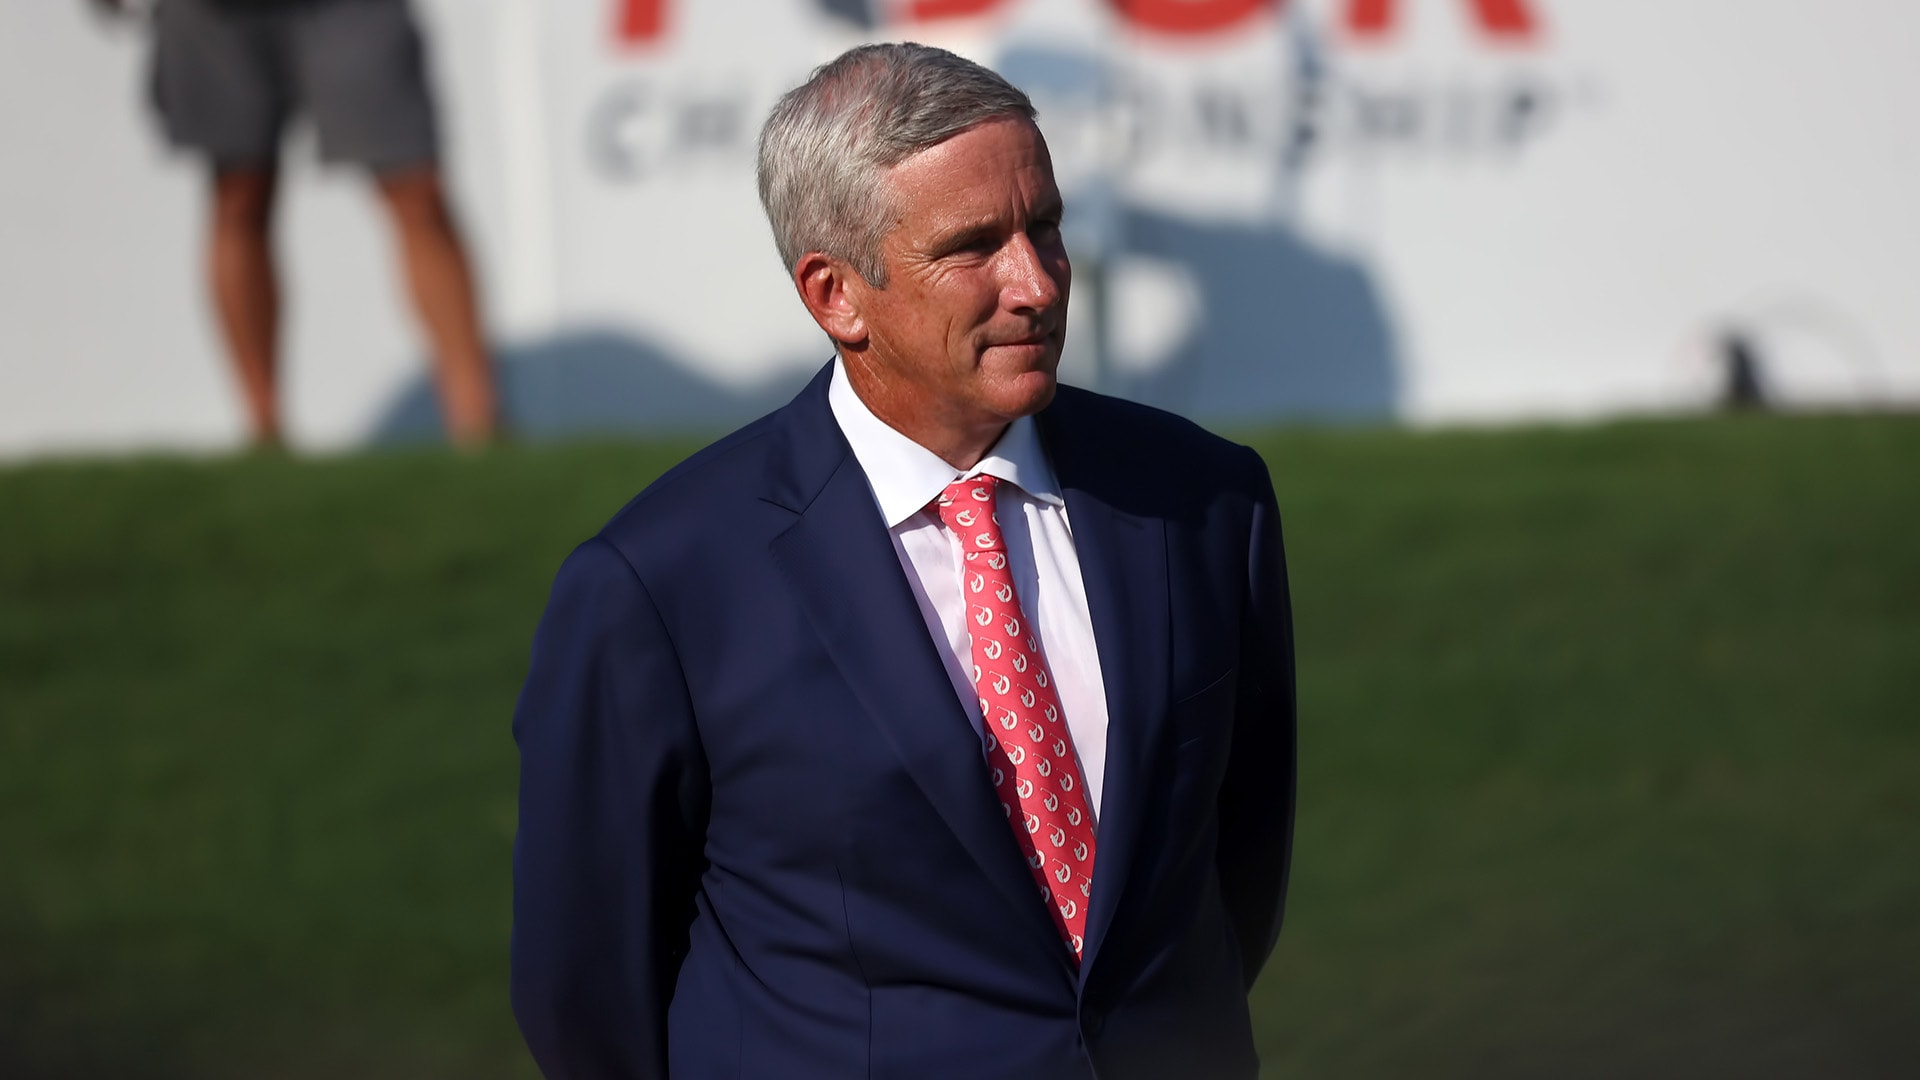 Judge rules against PGA Tour, antitrust lawsuit will proceed as scheduled